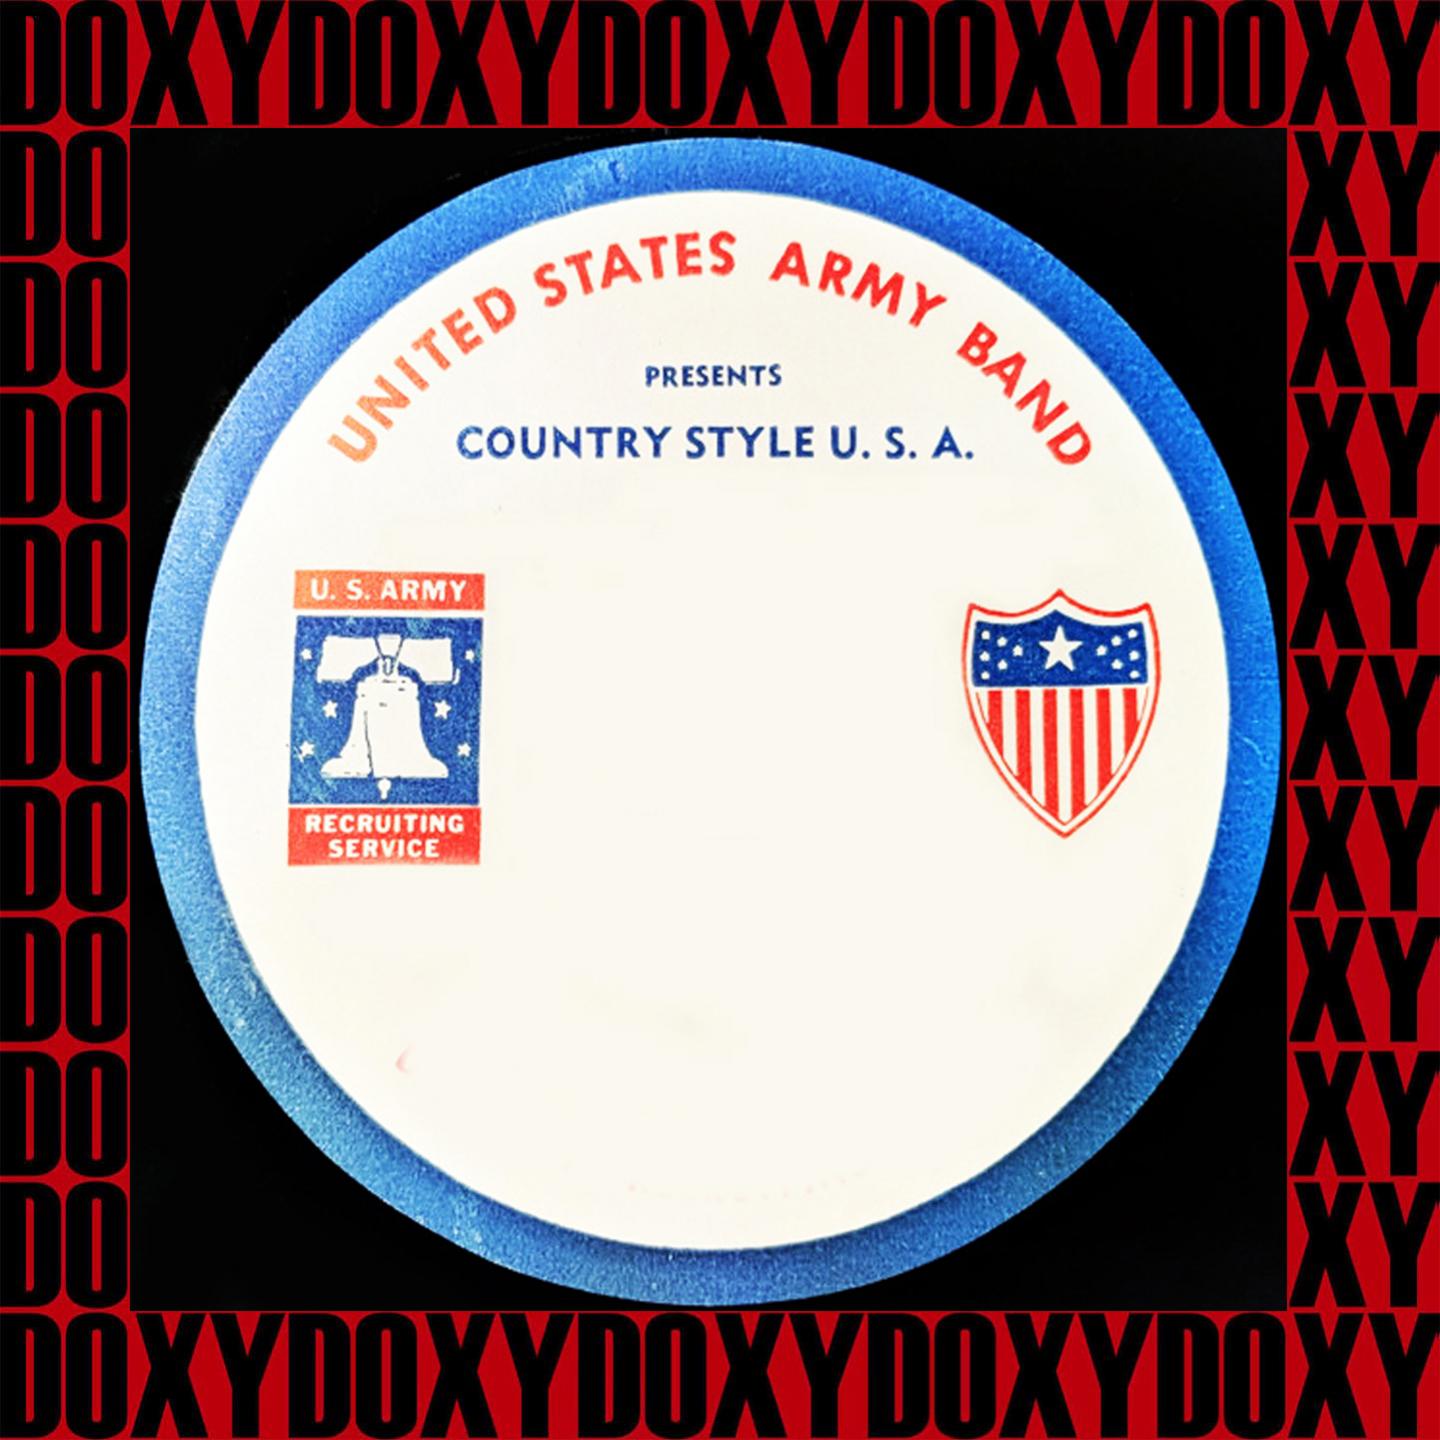 U.S. Army Band Presents Country Style (Remastered Version) (Doxy Collection)